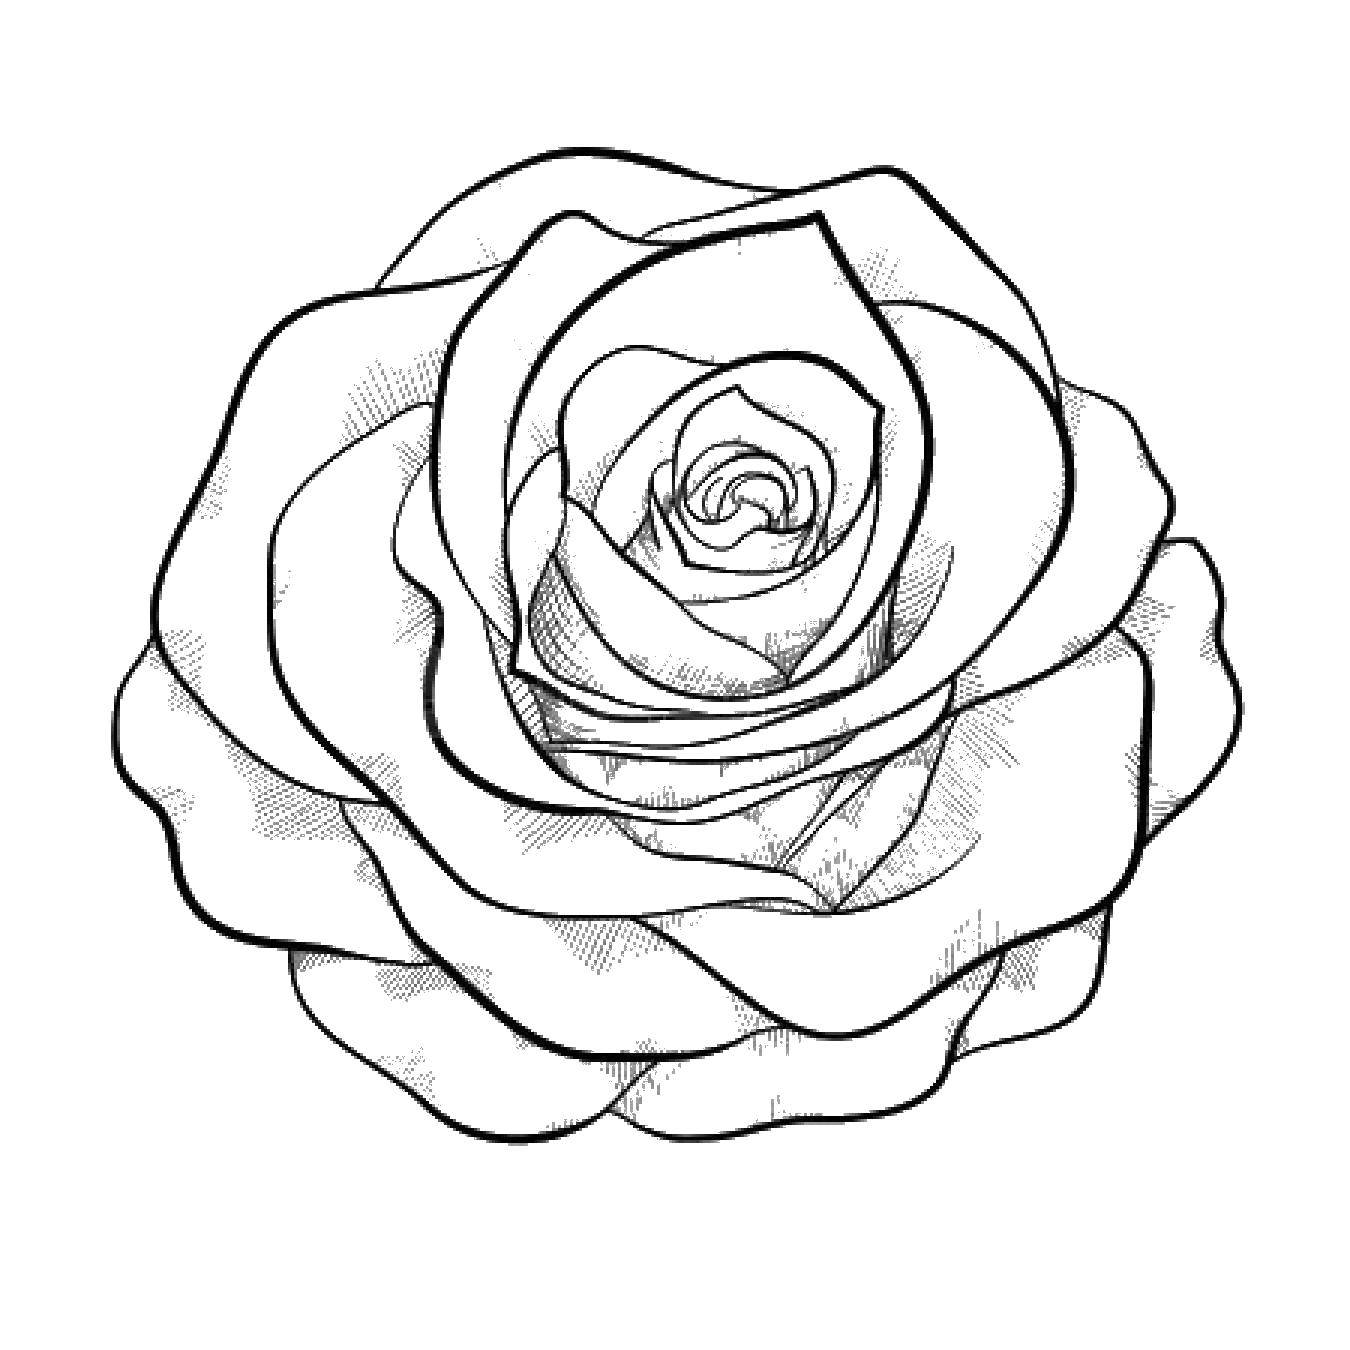 Coloring Rosebud. Category The contours of a rose. Tags:  rose, flower, lipestki.